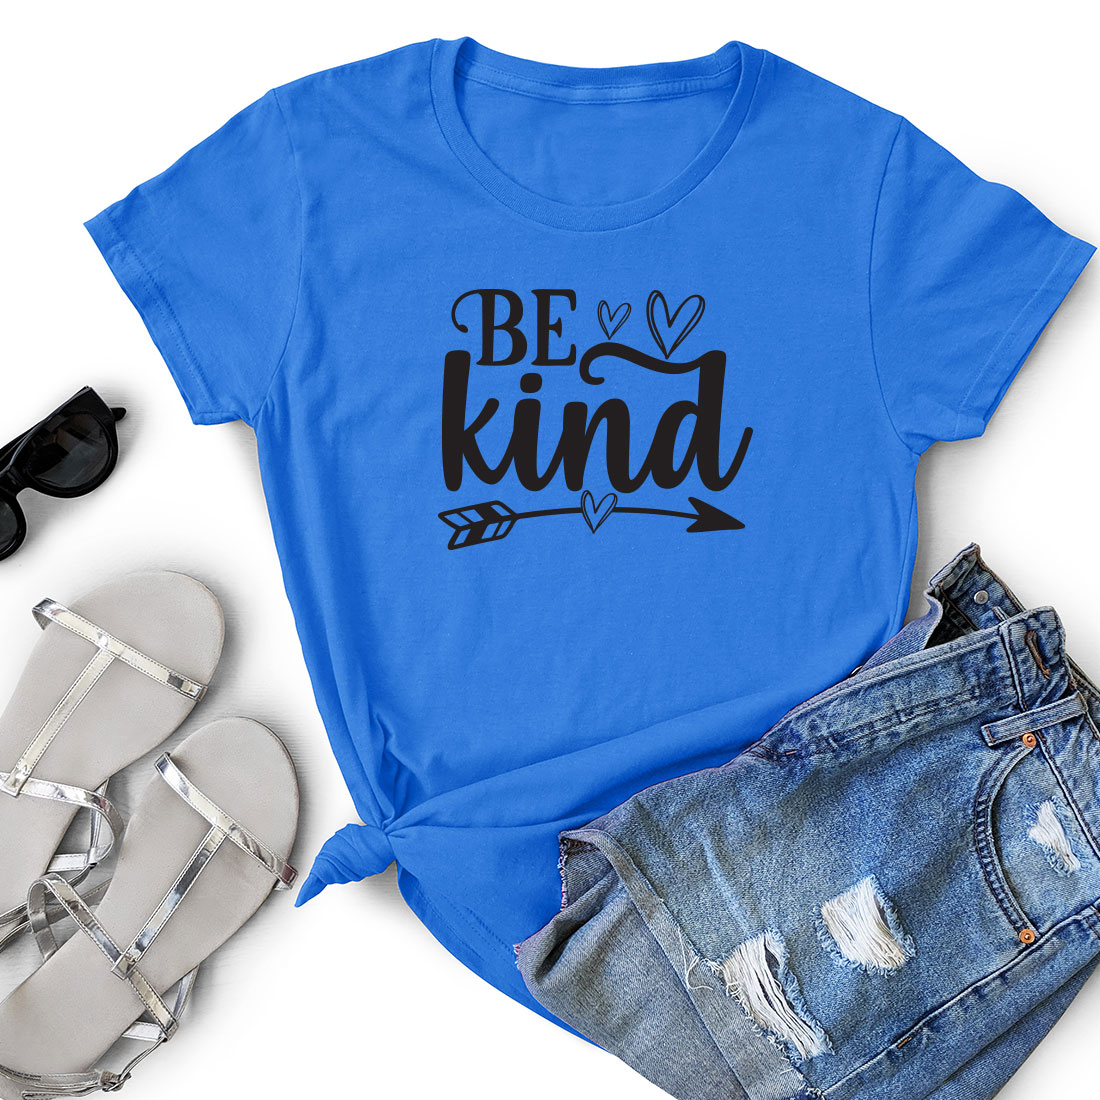 T - shirt that says be kind next to a pair of shorts.